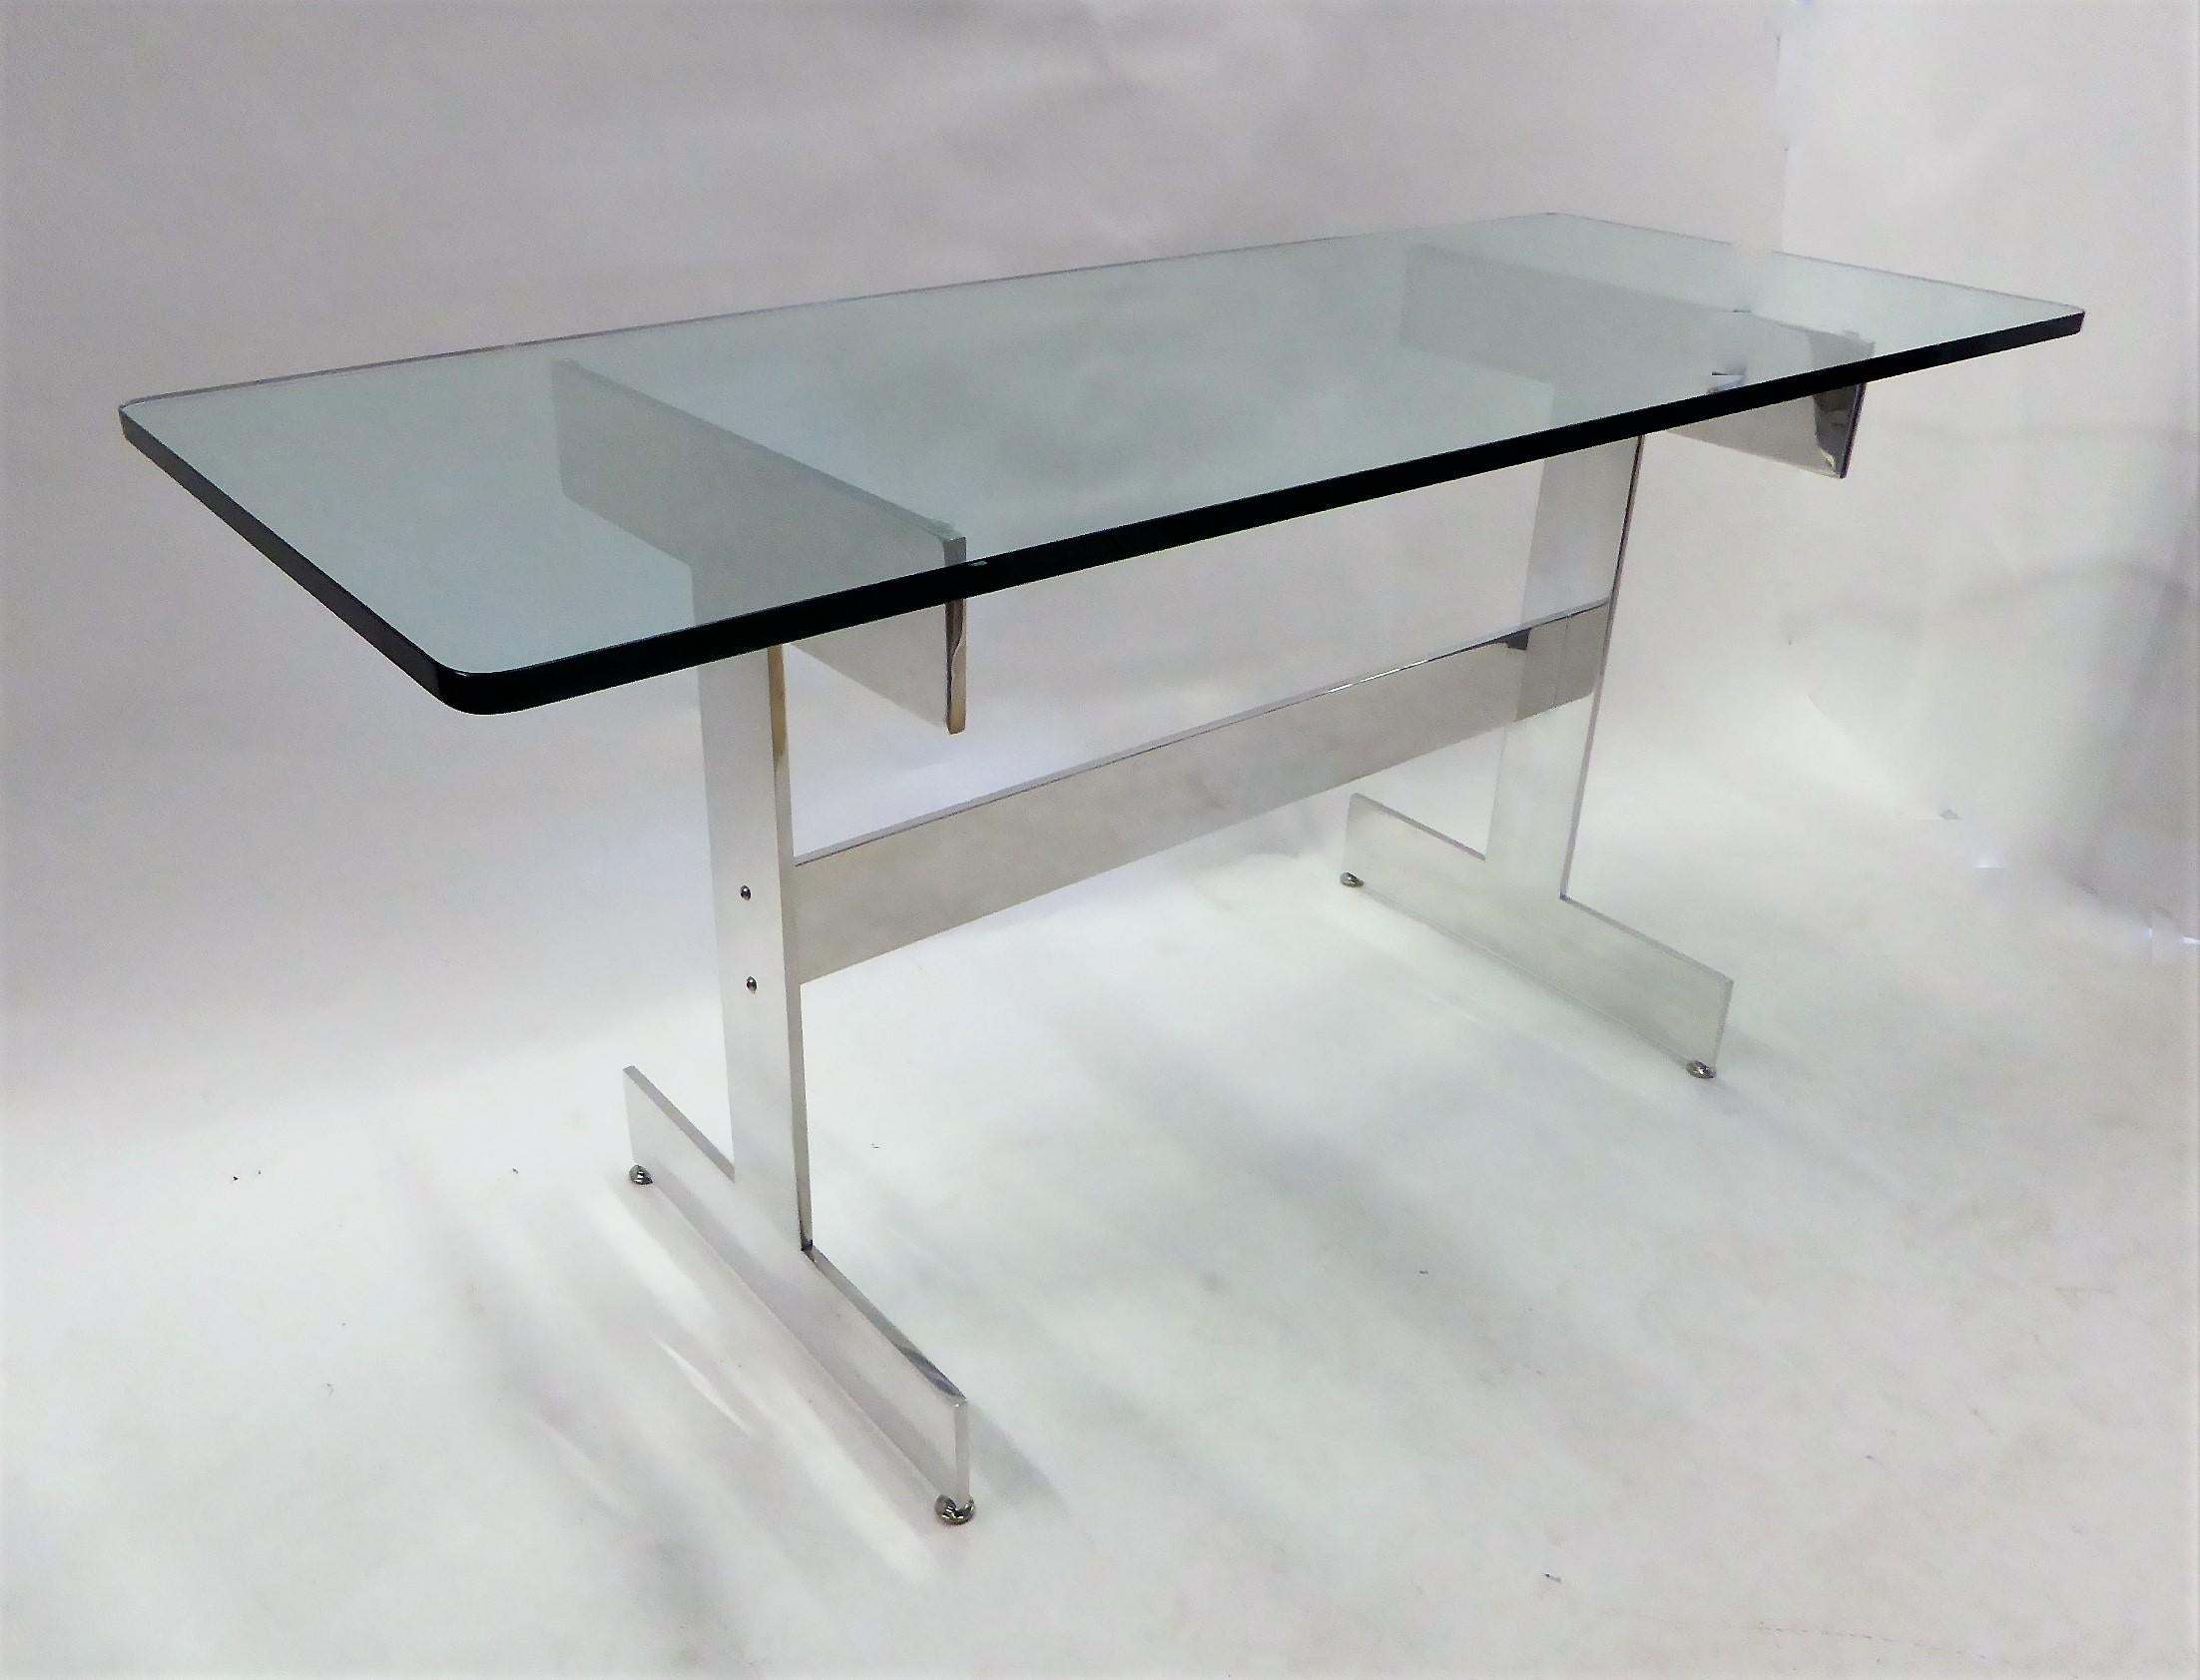 Attributed to Paul Mayen for Habitat, a 1960s polished aluminum rectangular console or writing desk with a thick 3/4 inch glass top.
Recently polished aluminum metal base. The glass with minor signs of use and age, no chips.
Measurements: Base 37